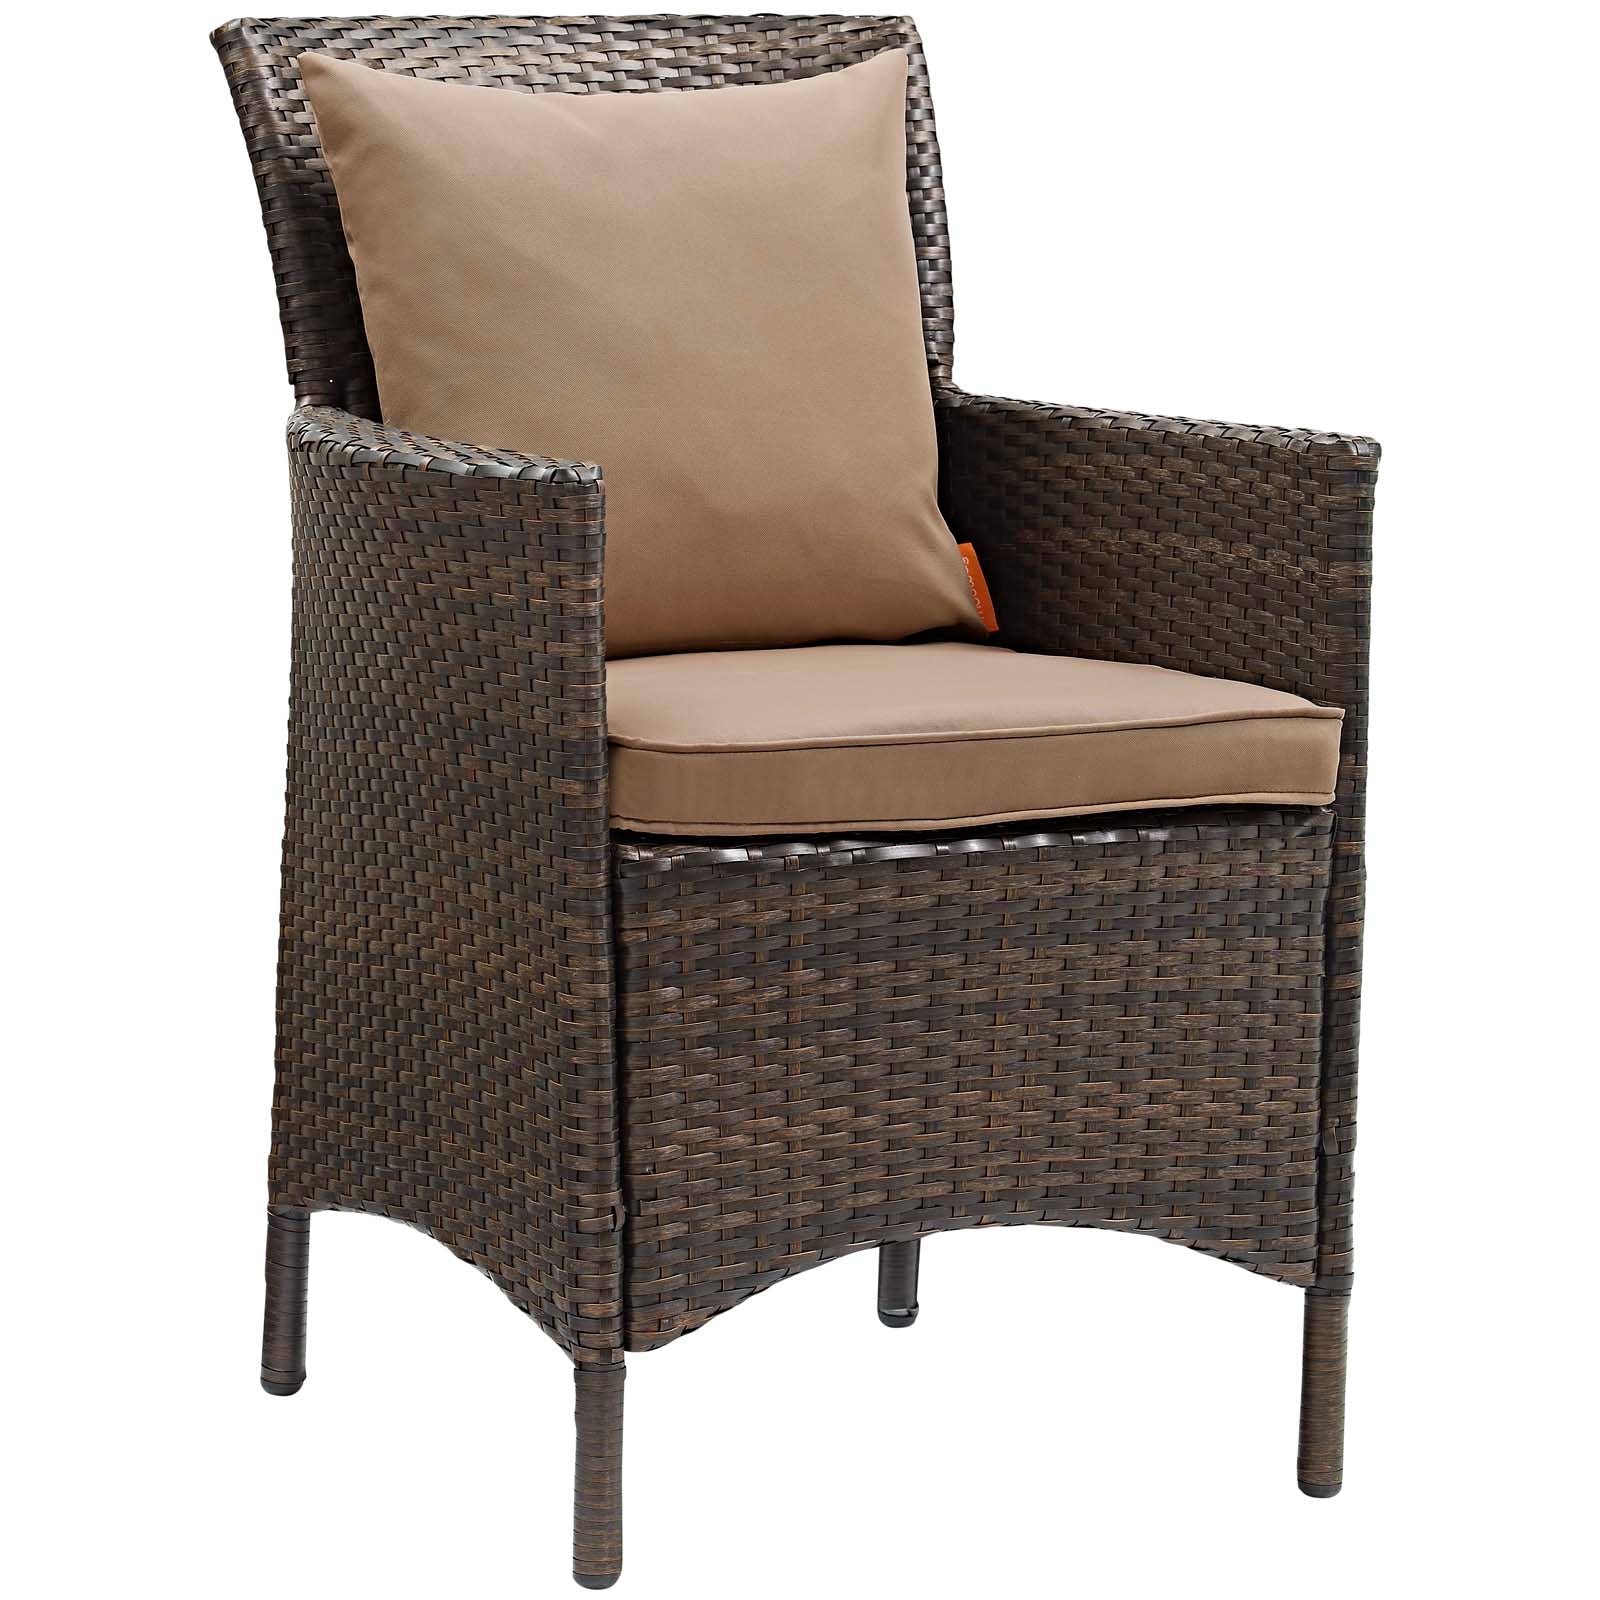 Modway Outdoor Dining Chairs - Conduit Outdoor Patio Wicker Rattan Dining Armchair Set of 2 Brown Mocha